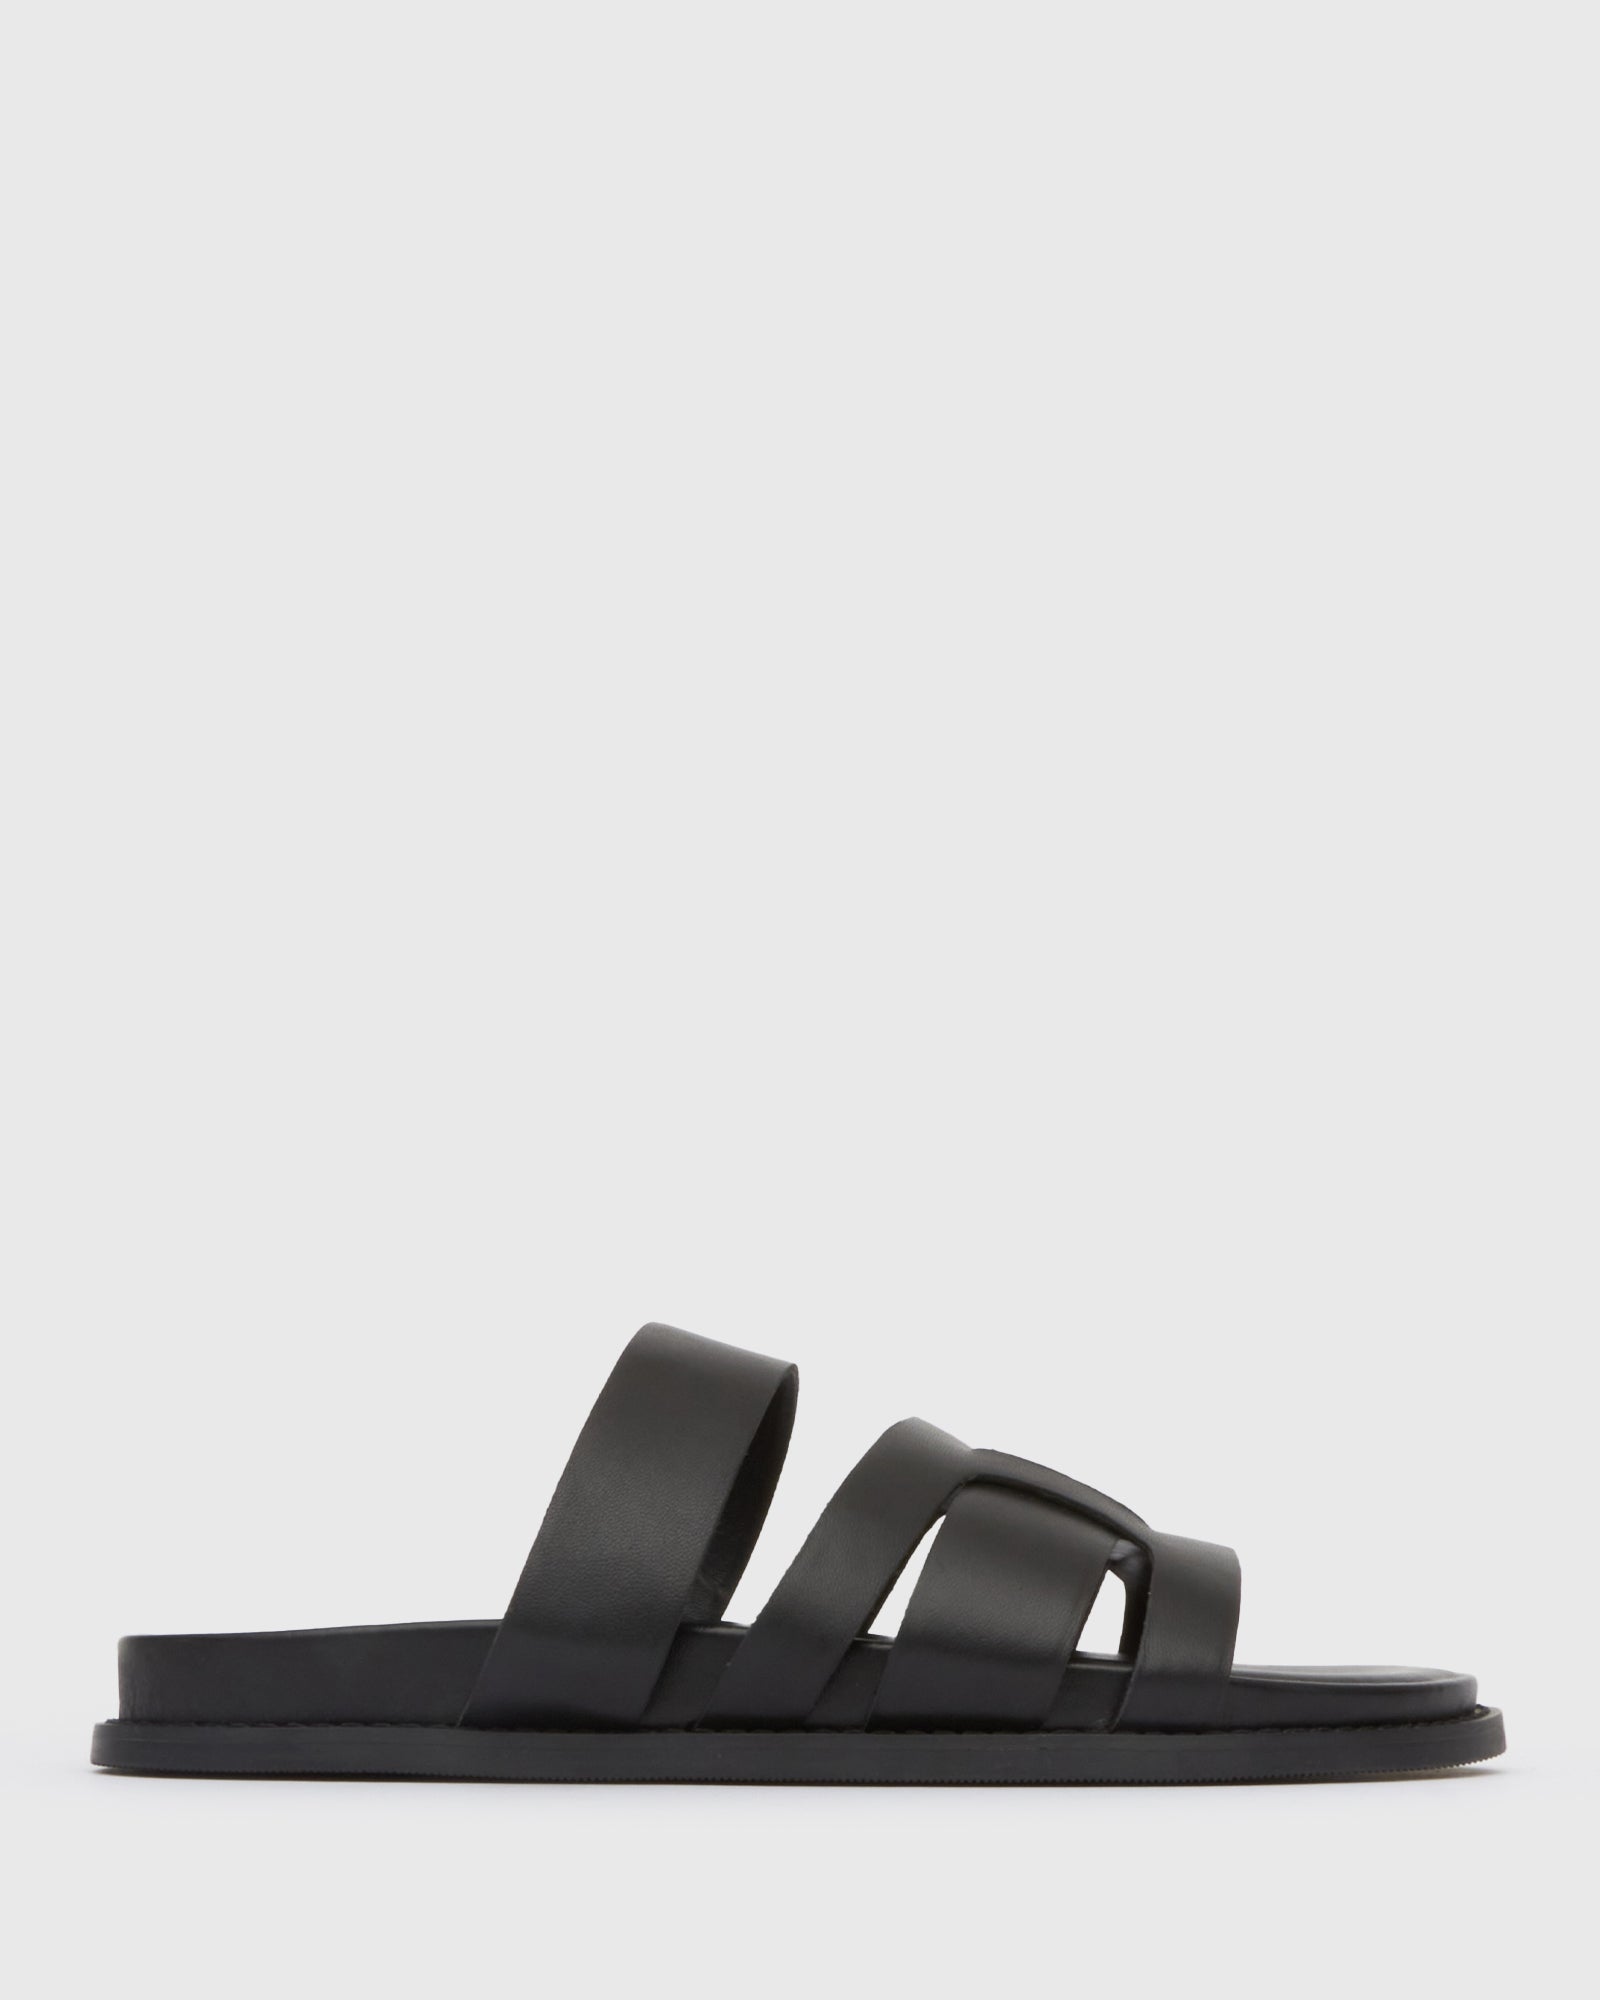 Buy ASTRO Round Toe Leather Slides by Betts online - Betts